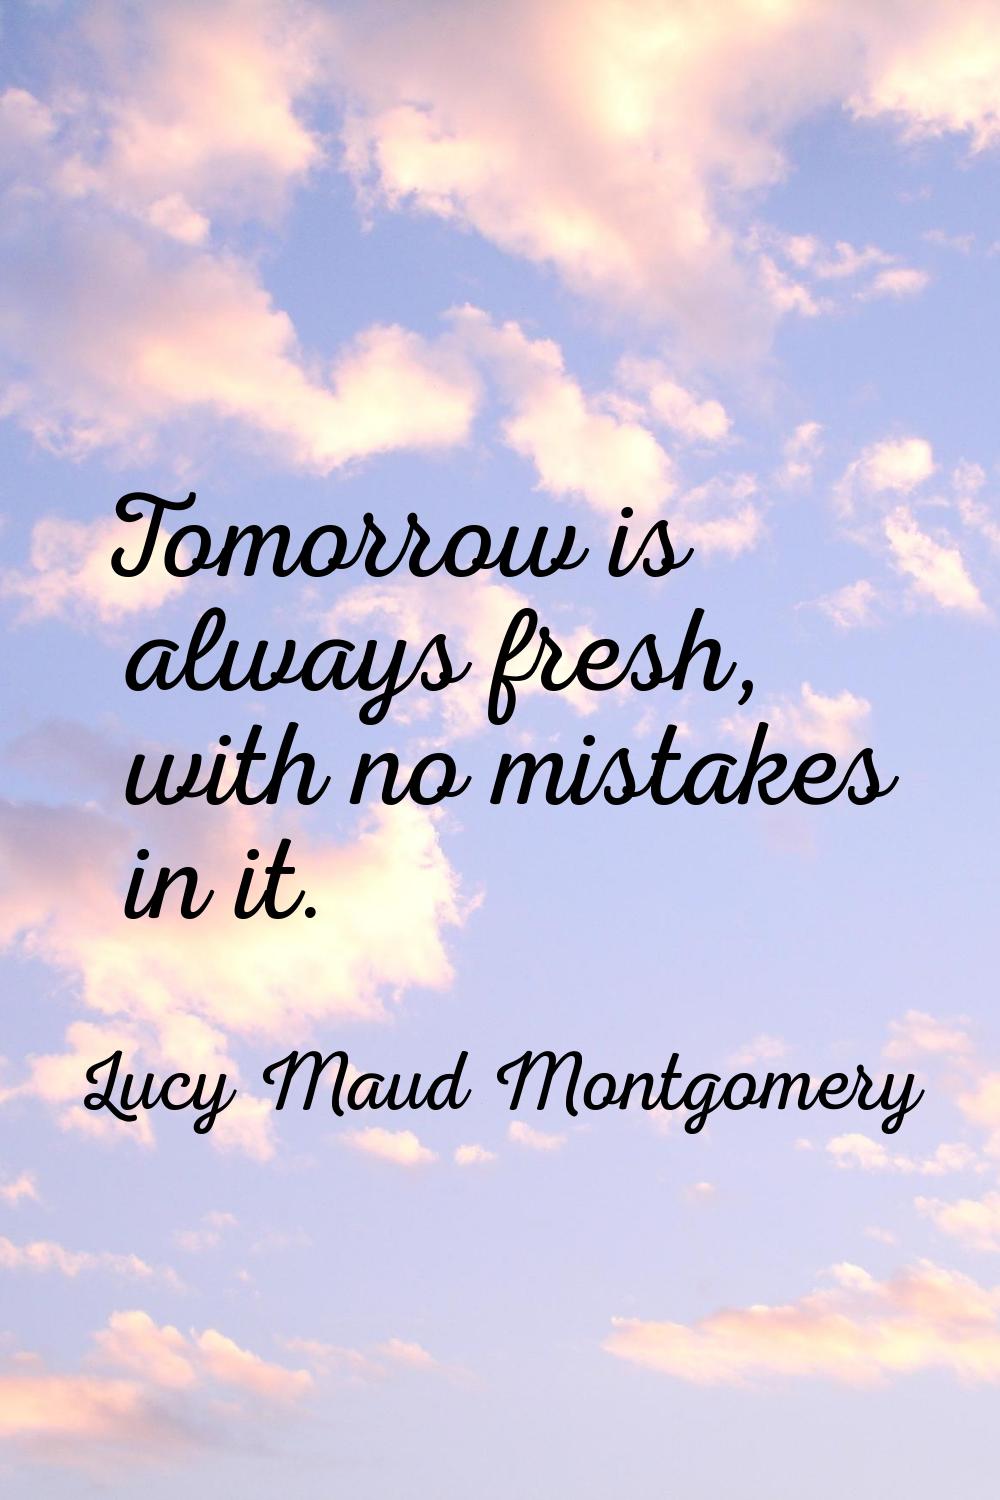 Tomorrow is always fresh, with no mistakes in it.